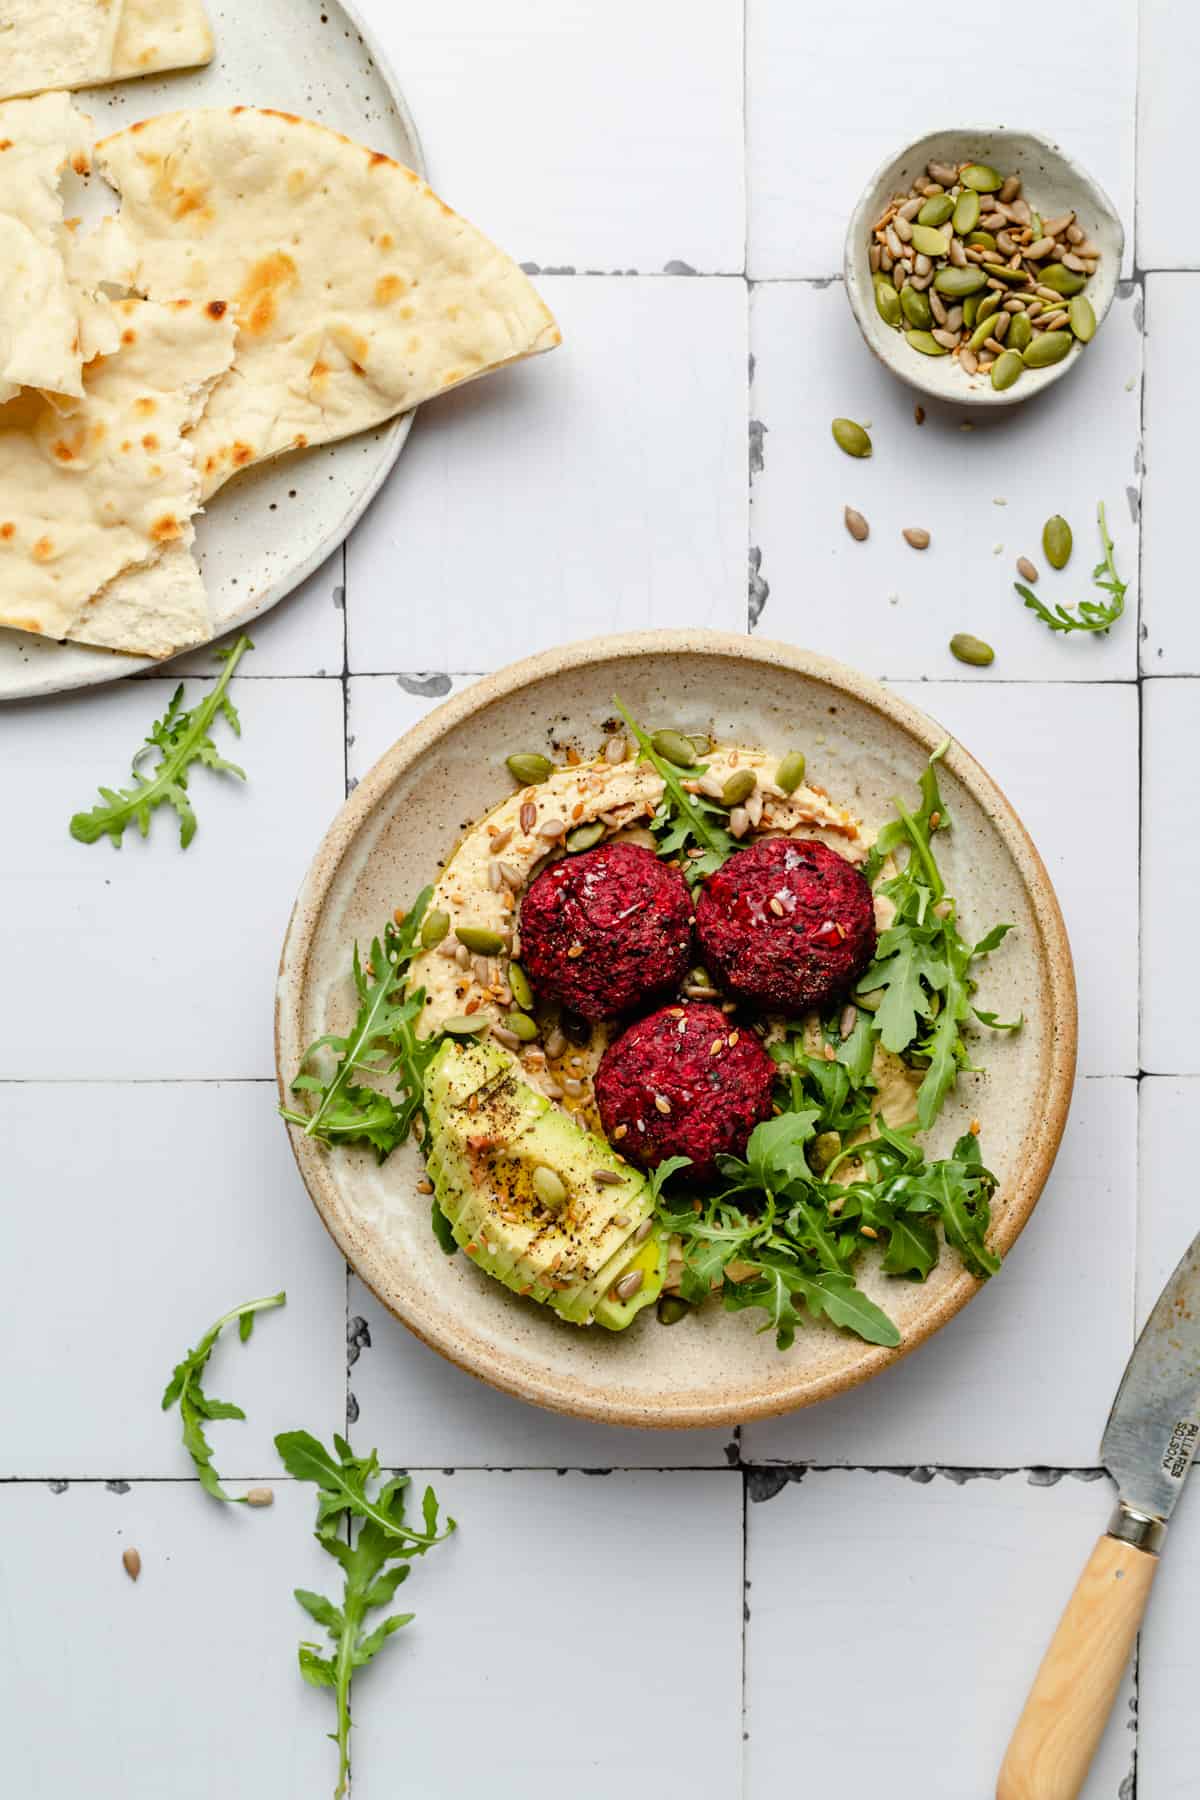 A bowl of beetroot falafel and hummus on a tiled background with a plate of pita on the side.